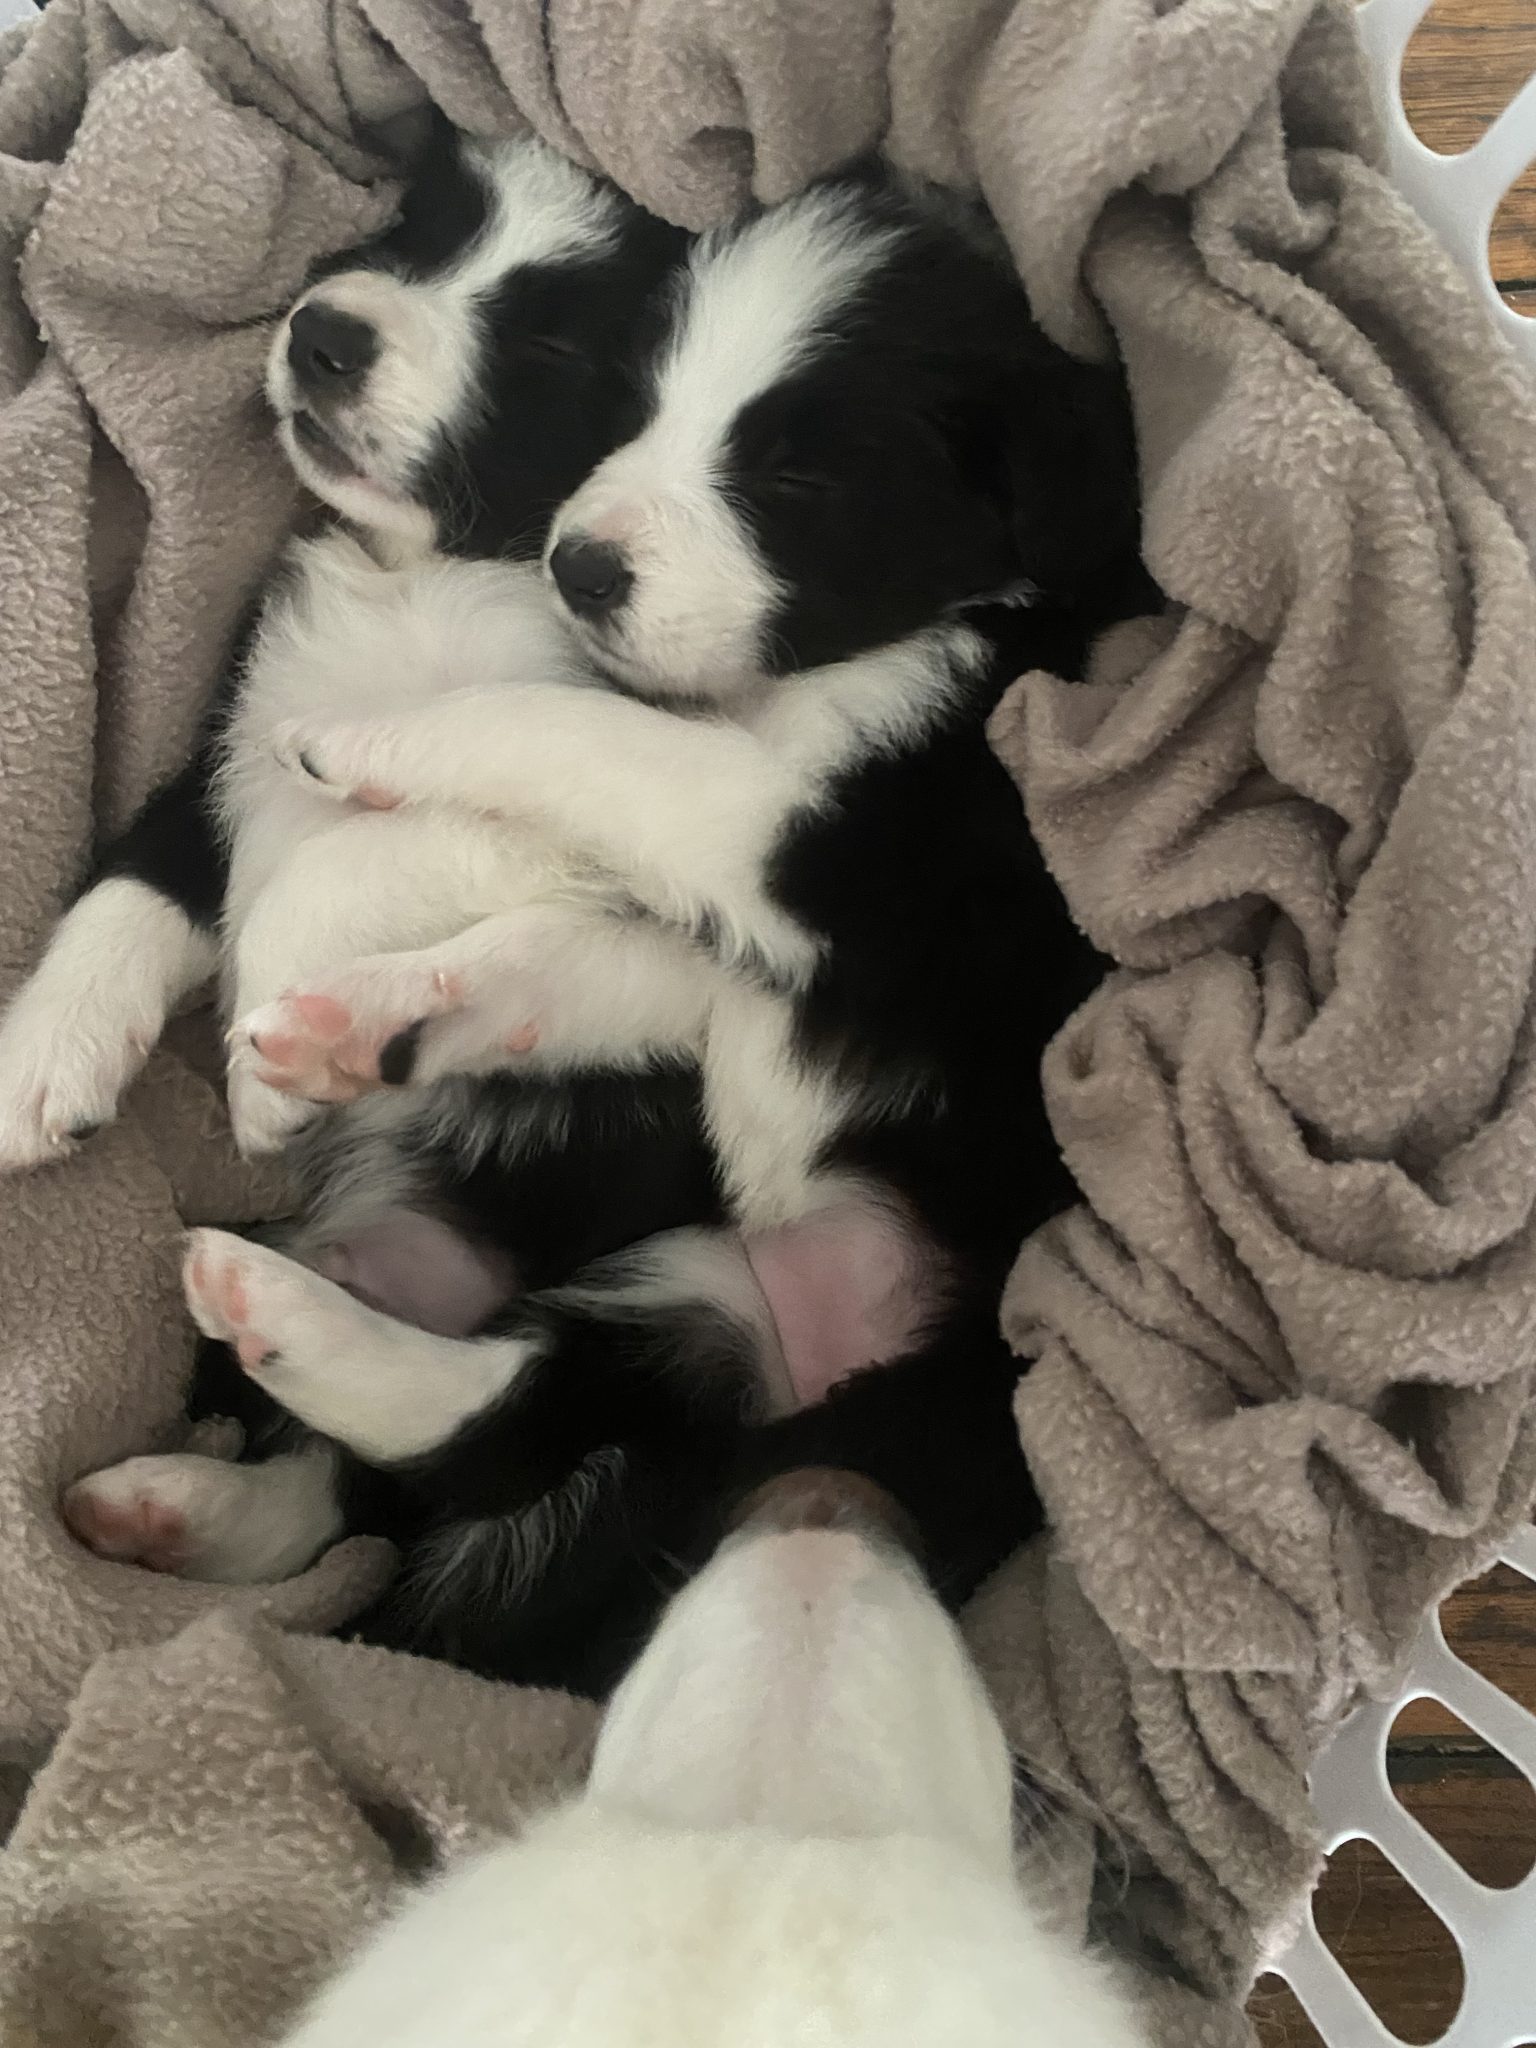 Black & White Border Collie puppy available